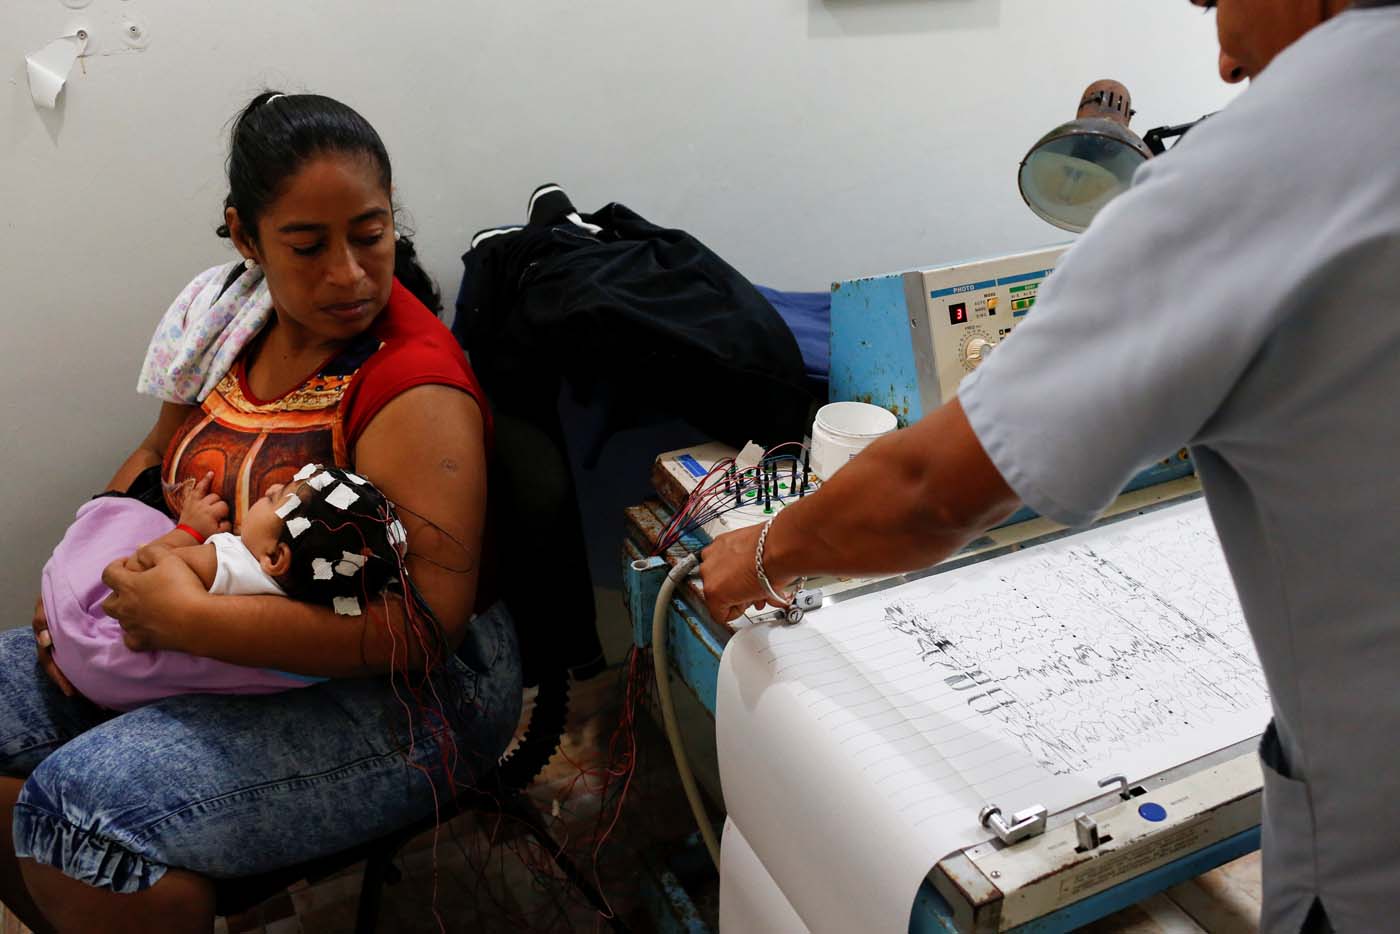 Iberis Vargas (L), holds her 7-month-old daughter, Geovelis Ramos, a neurological patient being treated with anticonvulsants, during an electroencephalogram in a clinic in La Guaira, Venezuela February 4, 2017. REUTERS/Carlos Garcia Rawlins    SEARCH "EPILEPSY CARACAS" FOR THIS STORY. SEARCH "WIDER IMAGE" FOR ALL STORIES.